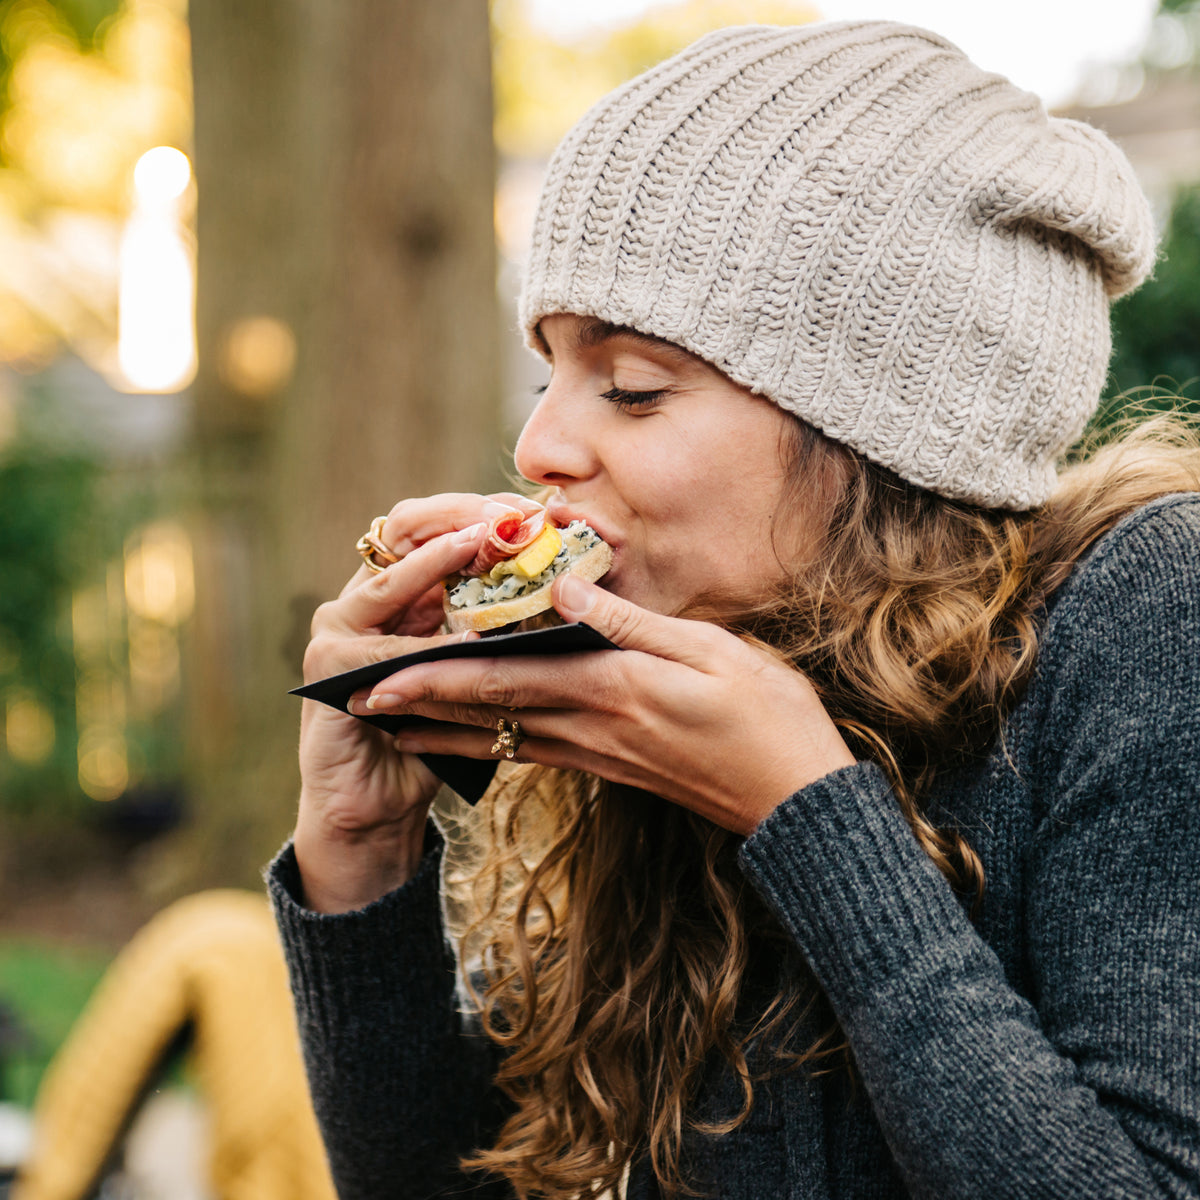 Lady eating a sandwich with a beanie on and appears to be in some form of woodland.